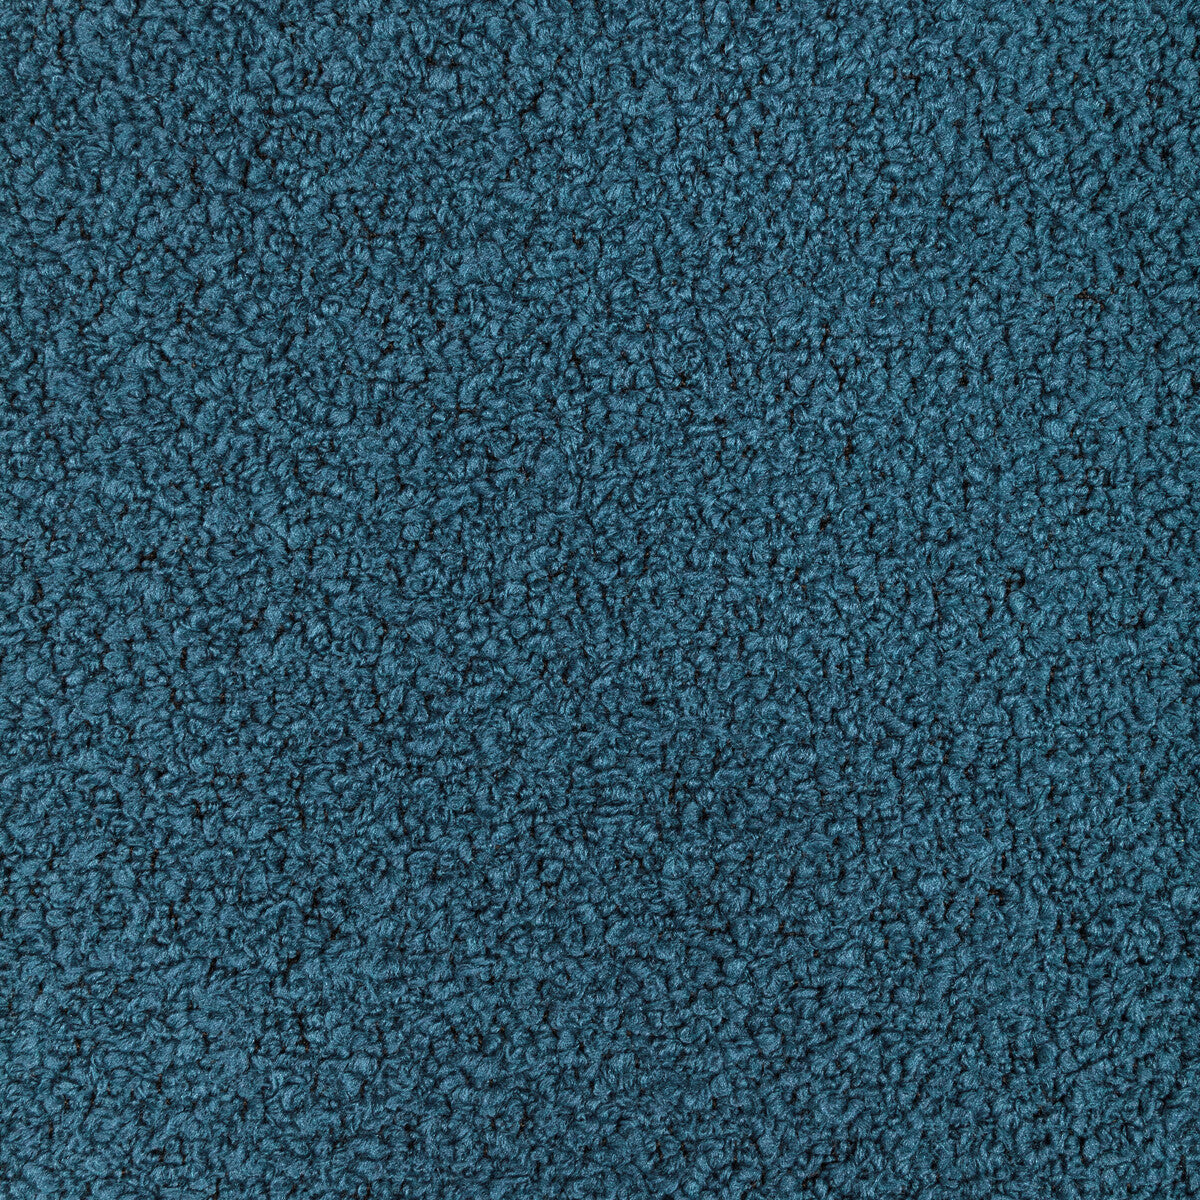 Namaste Boucle fabric in dress blue color - pattern 36388.5.0 - by Kravet Design in the Crypton Home - Celliant collection